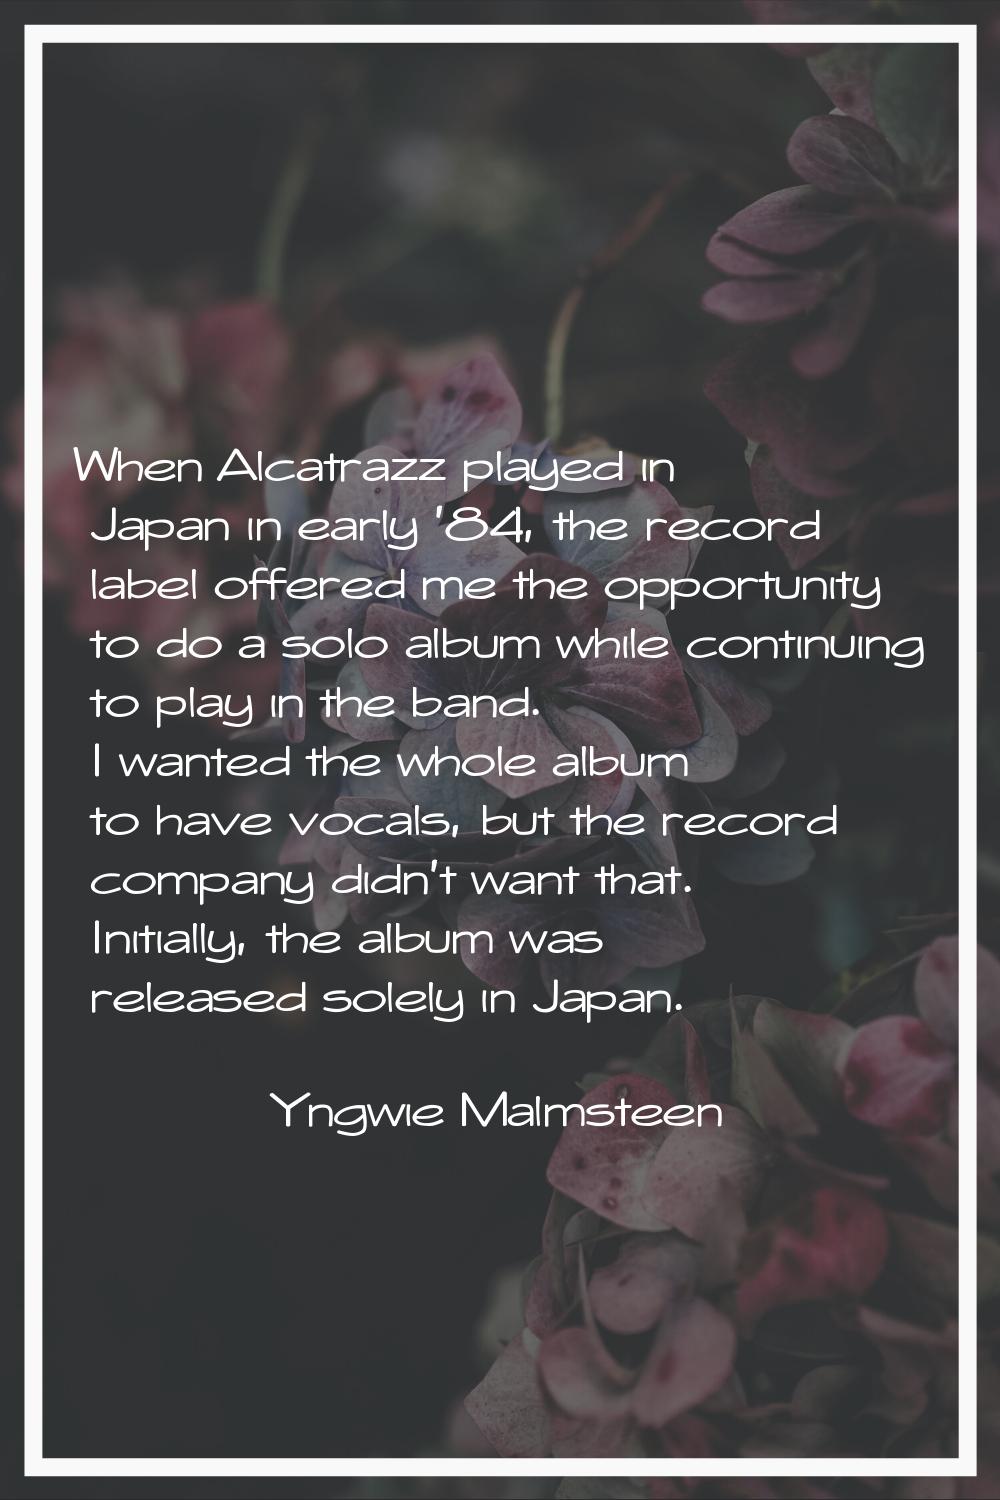 When Alcatrazz played in Japan in early '84, the record label offered me the opportunity to do a so